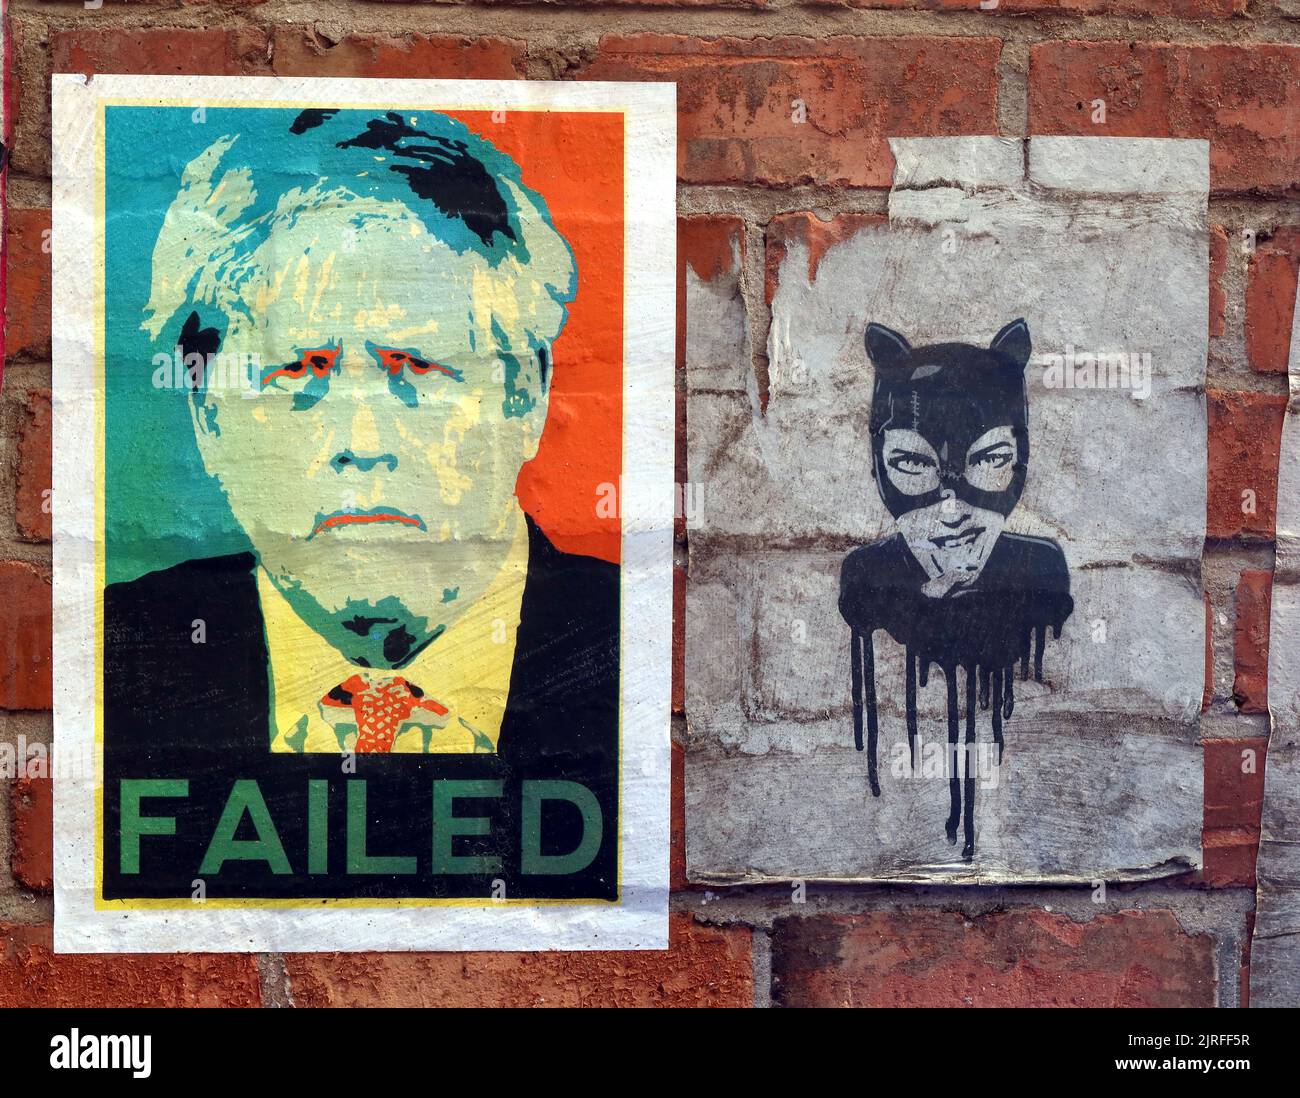 Boris Johnson has failed pasted image and cat woman, Deansgate, Blackpool , Lancs, England, FY1 1BN Stock Photo